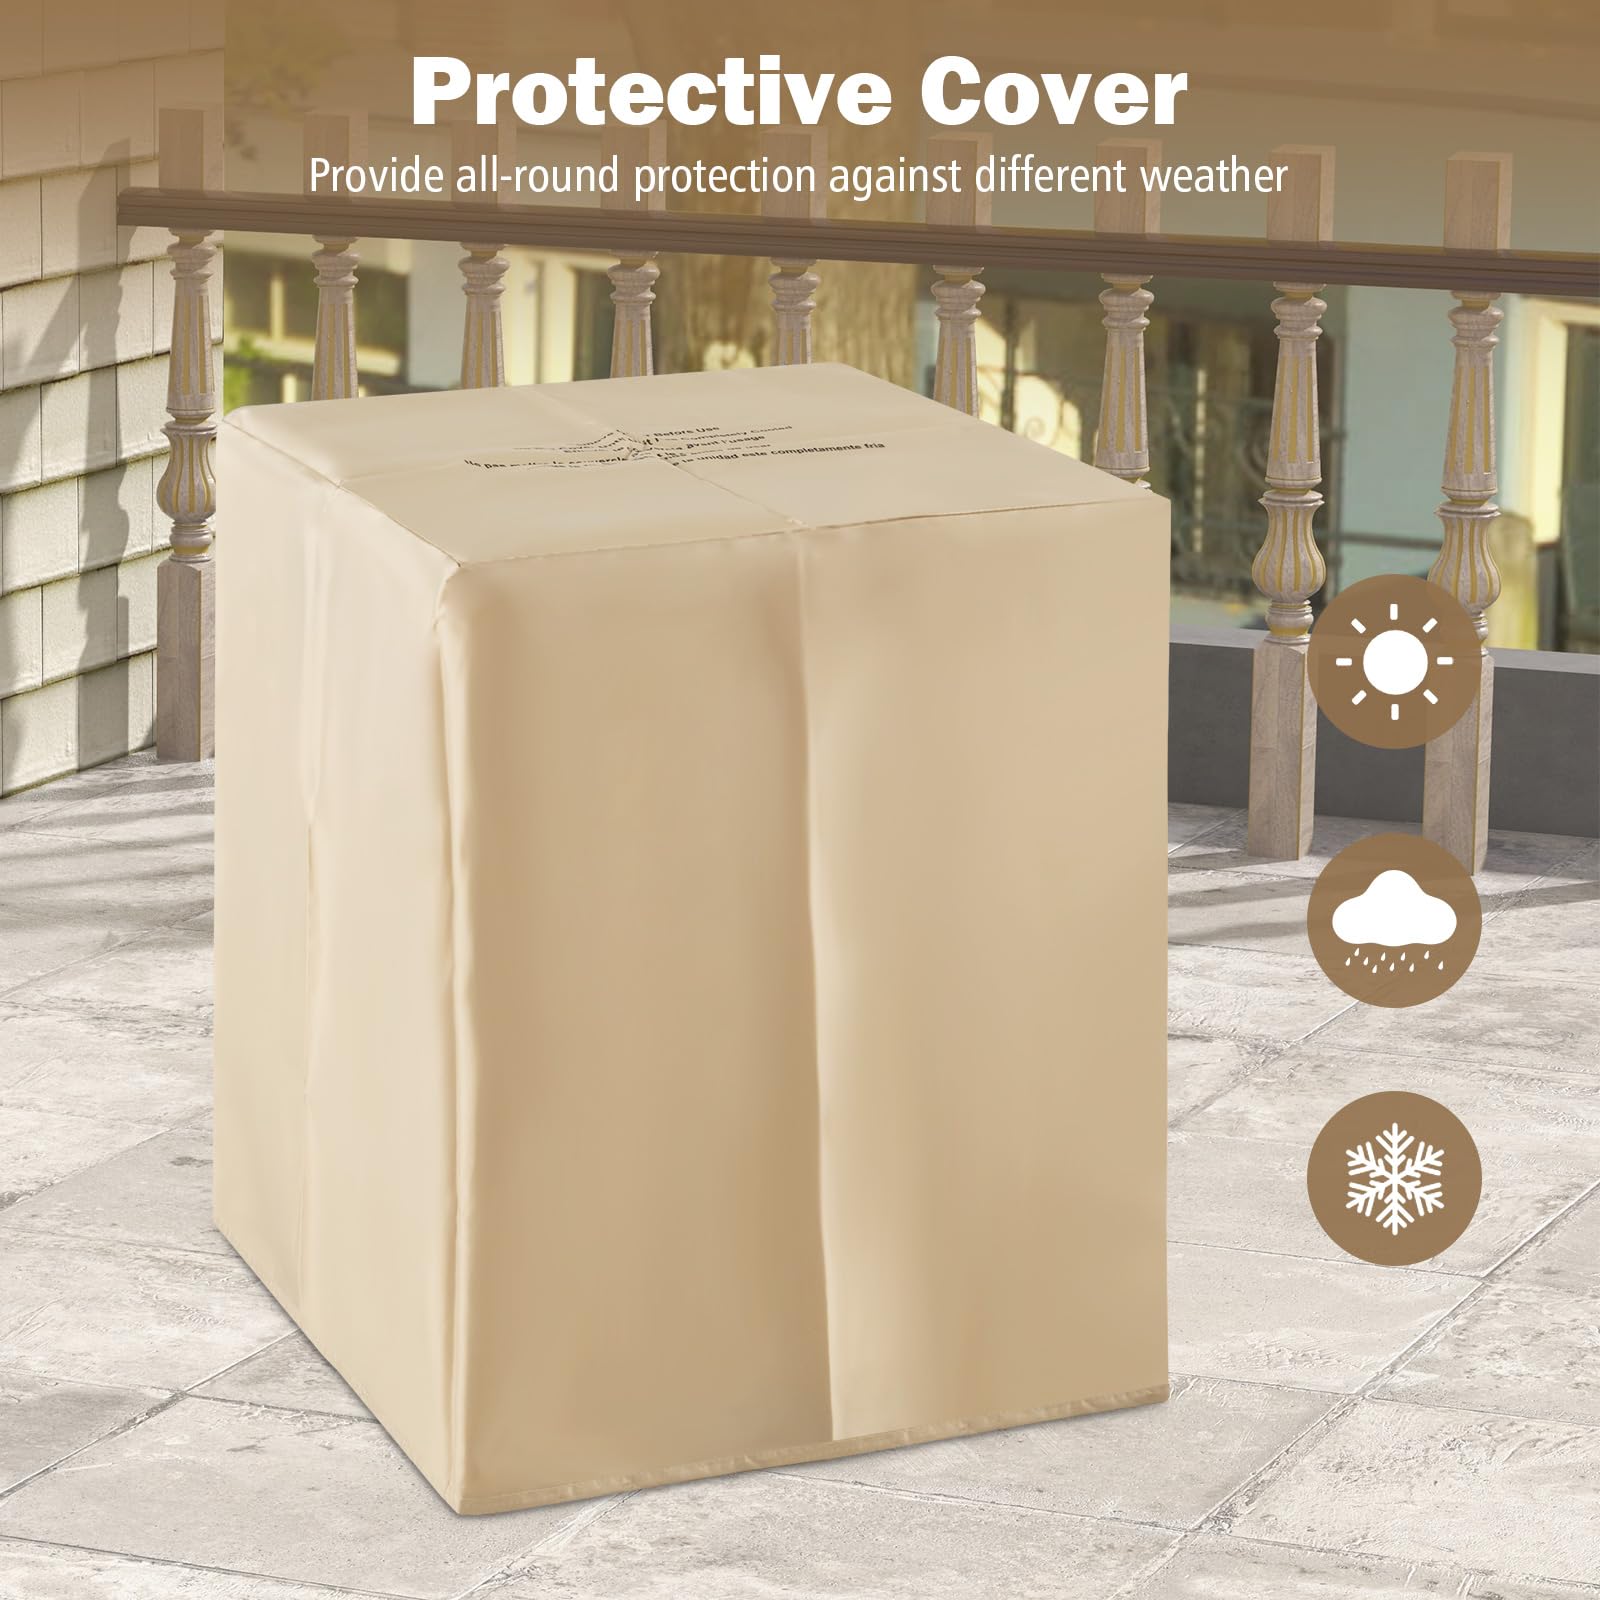 Giantex Propane Tank Cover Table - 16" Square Hideaway Table w/Waterproof Cover and Side Handles